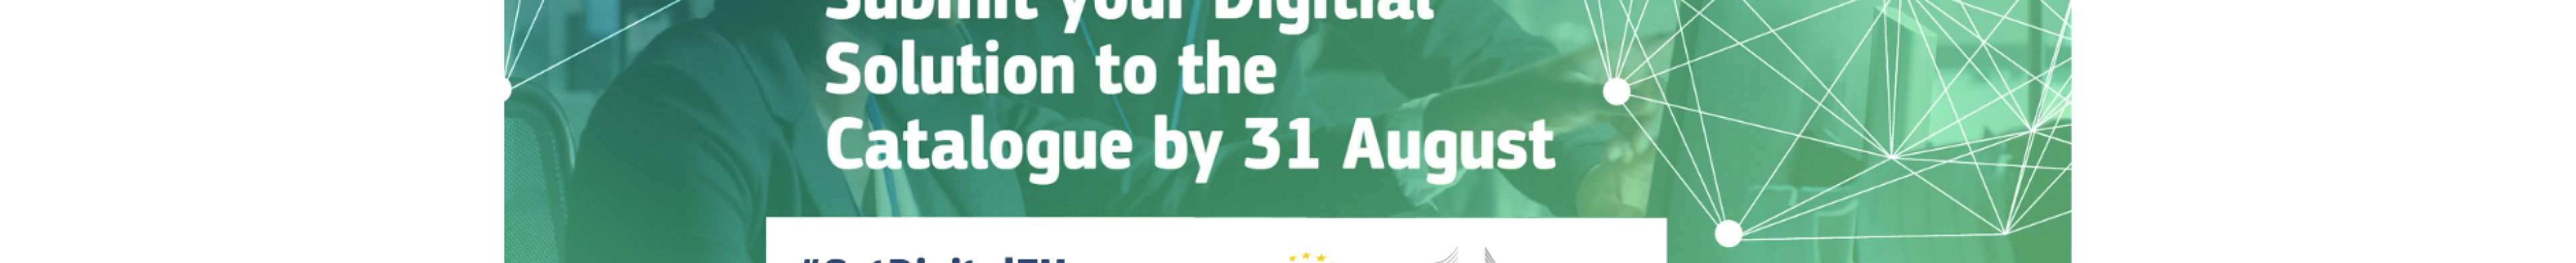 banners_2022_getdigital.png